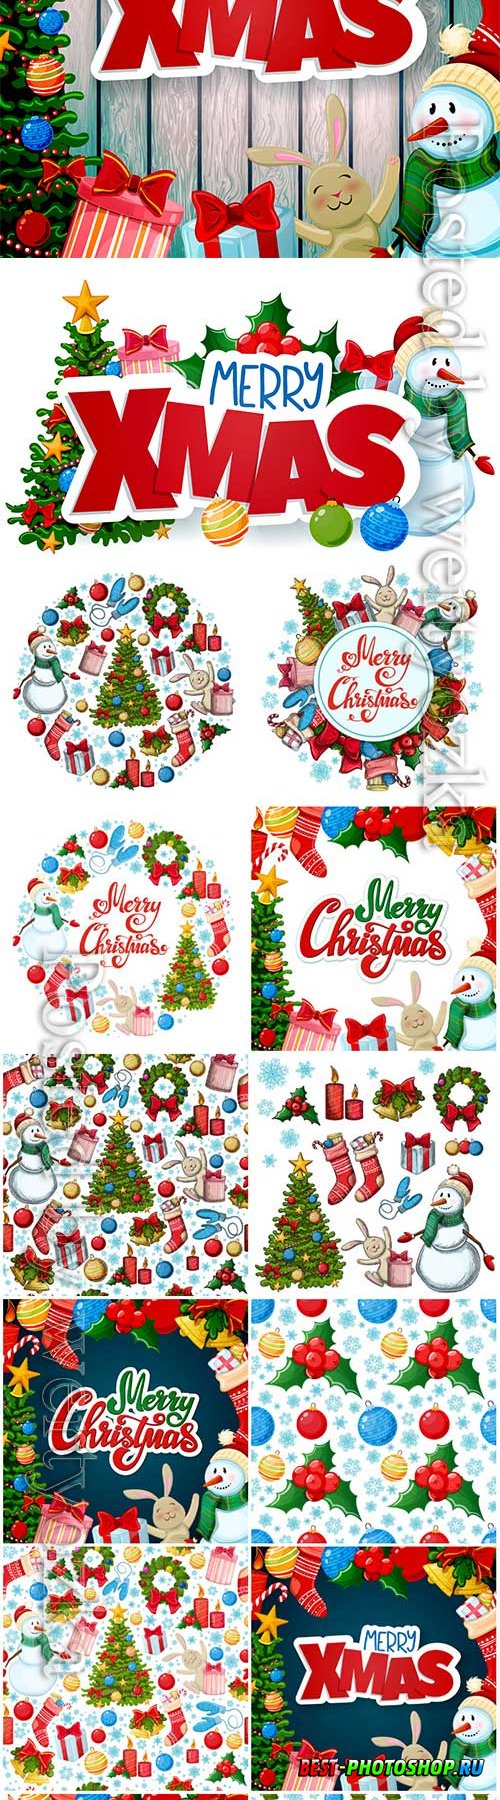 Merry Christmas vector card in decorations